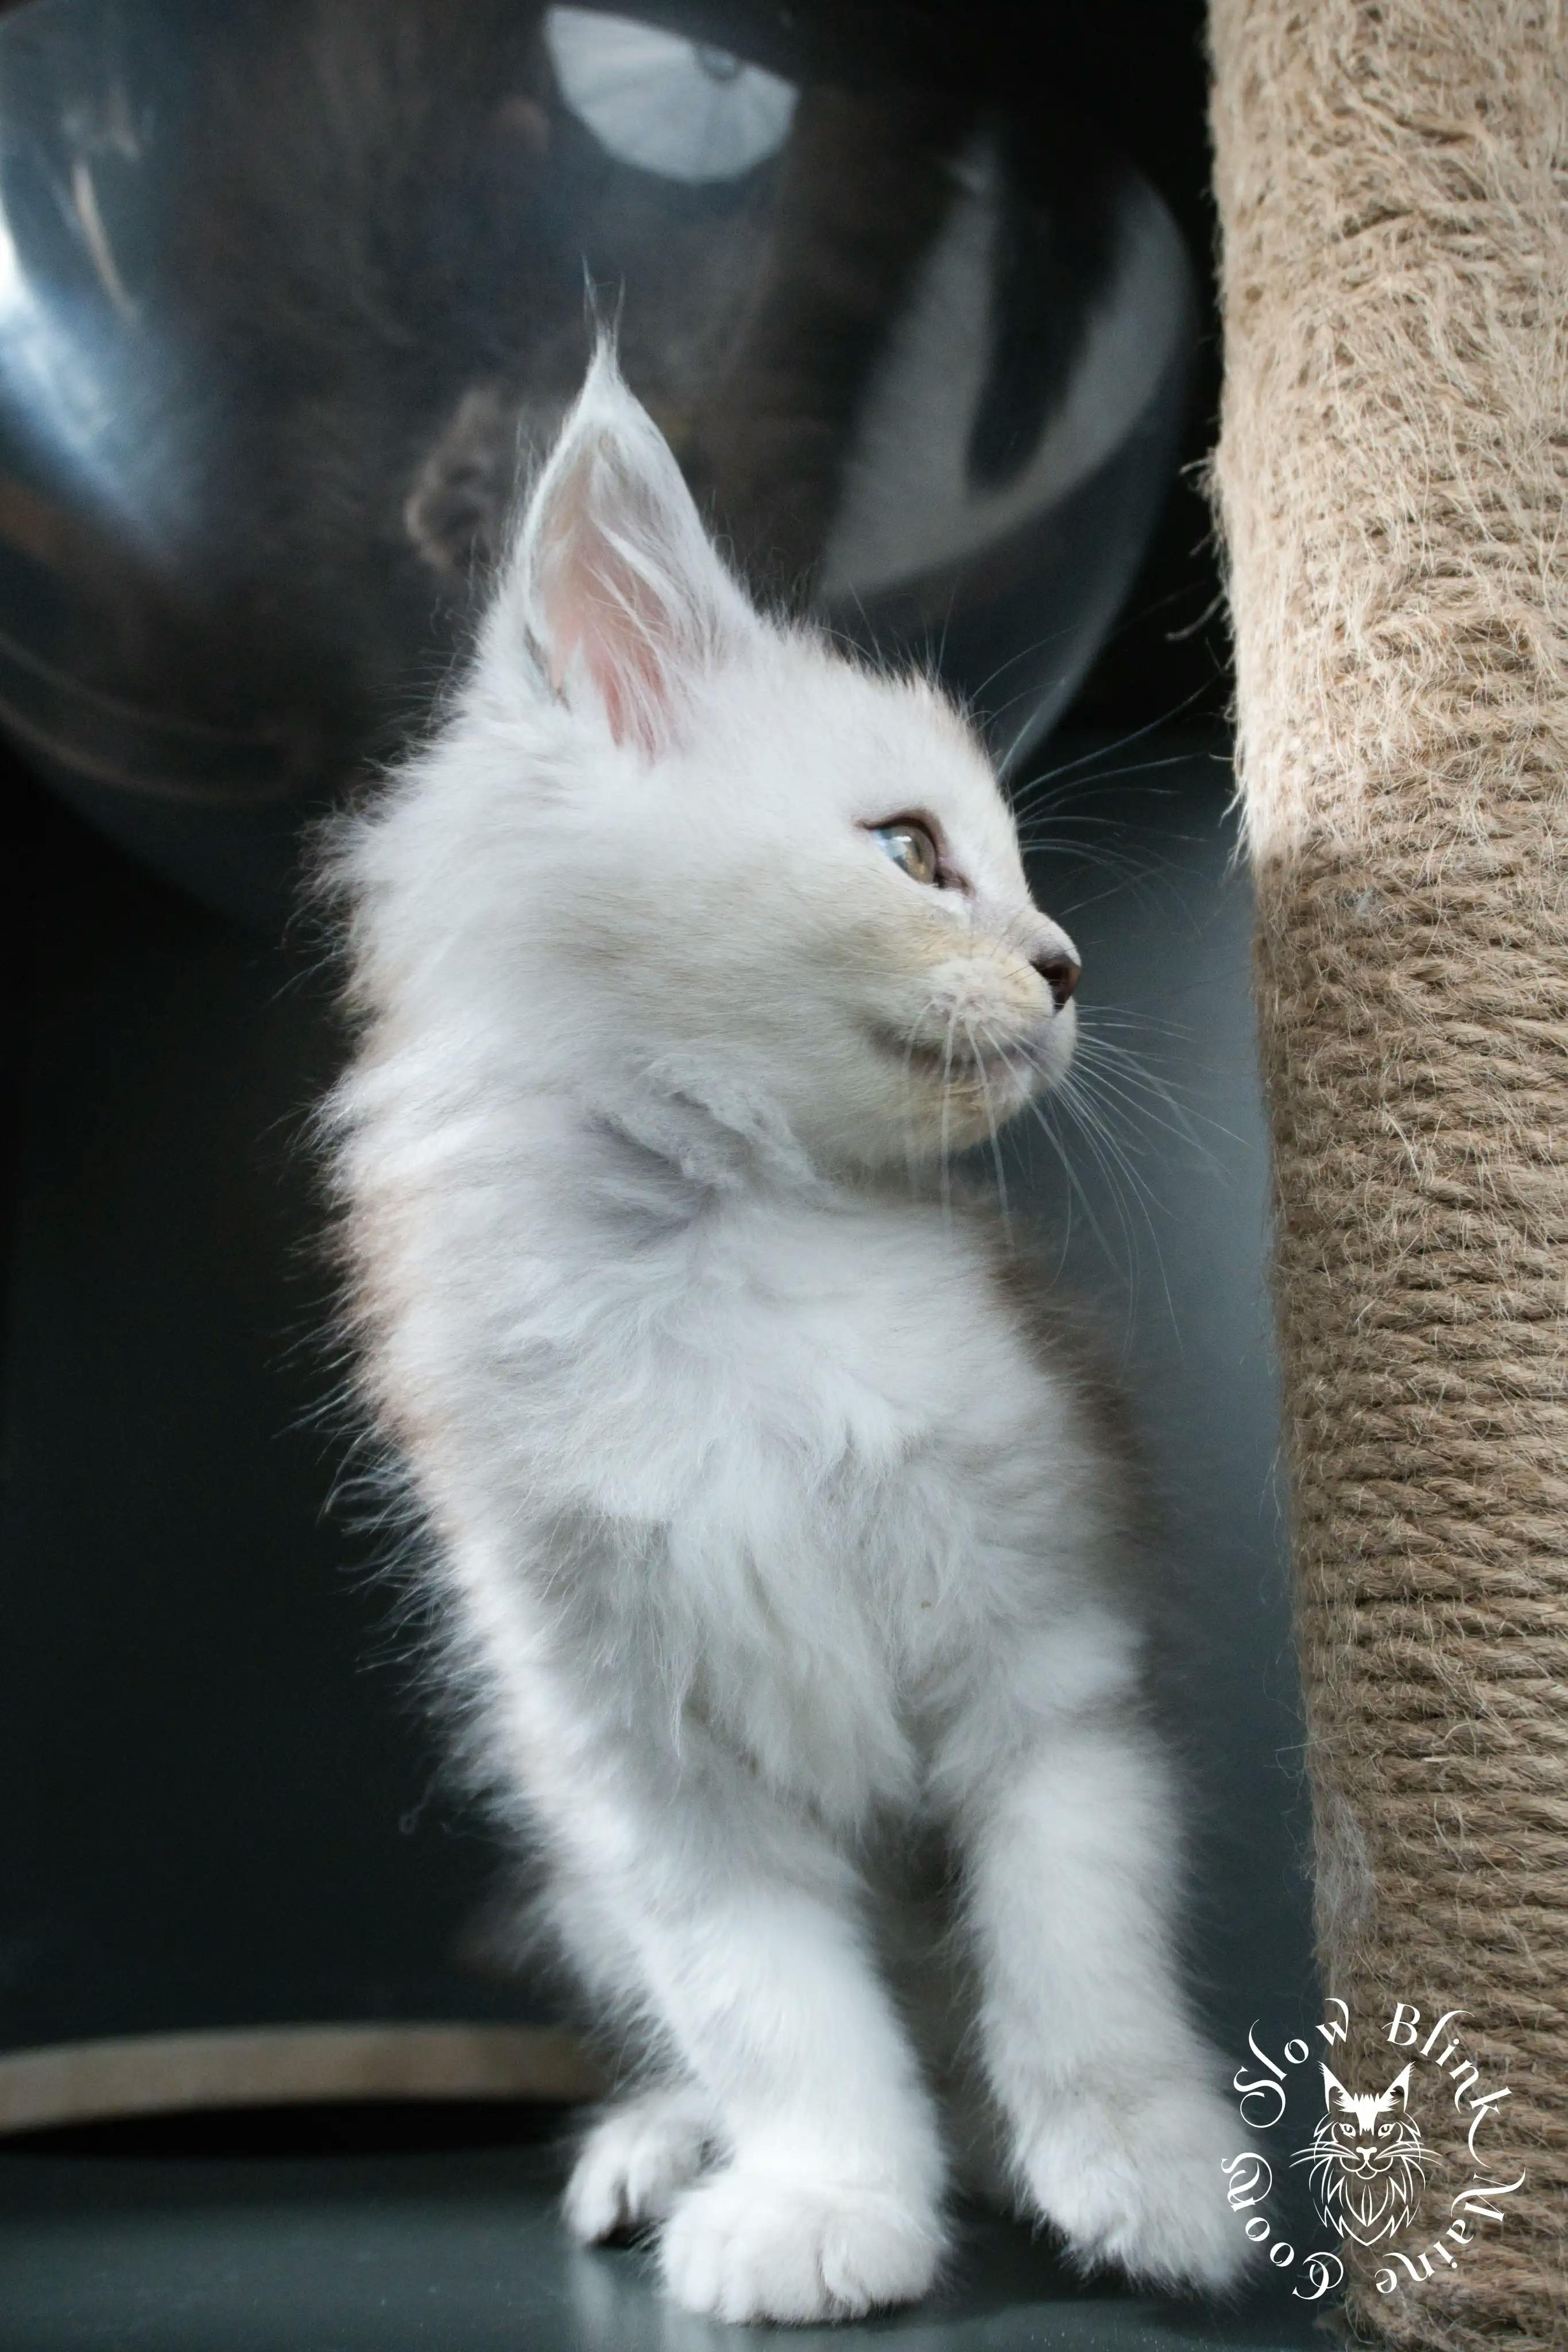 High Silver Maine Coon Kittens > black silver tabby maine coon kitten | ems code ns 22 23 24 25 | slowblinkmainecoons | 459